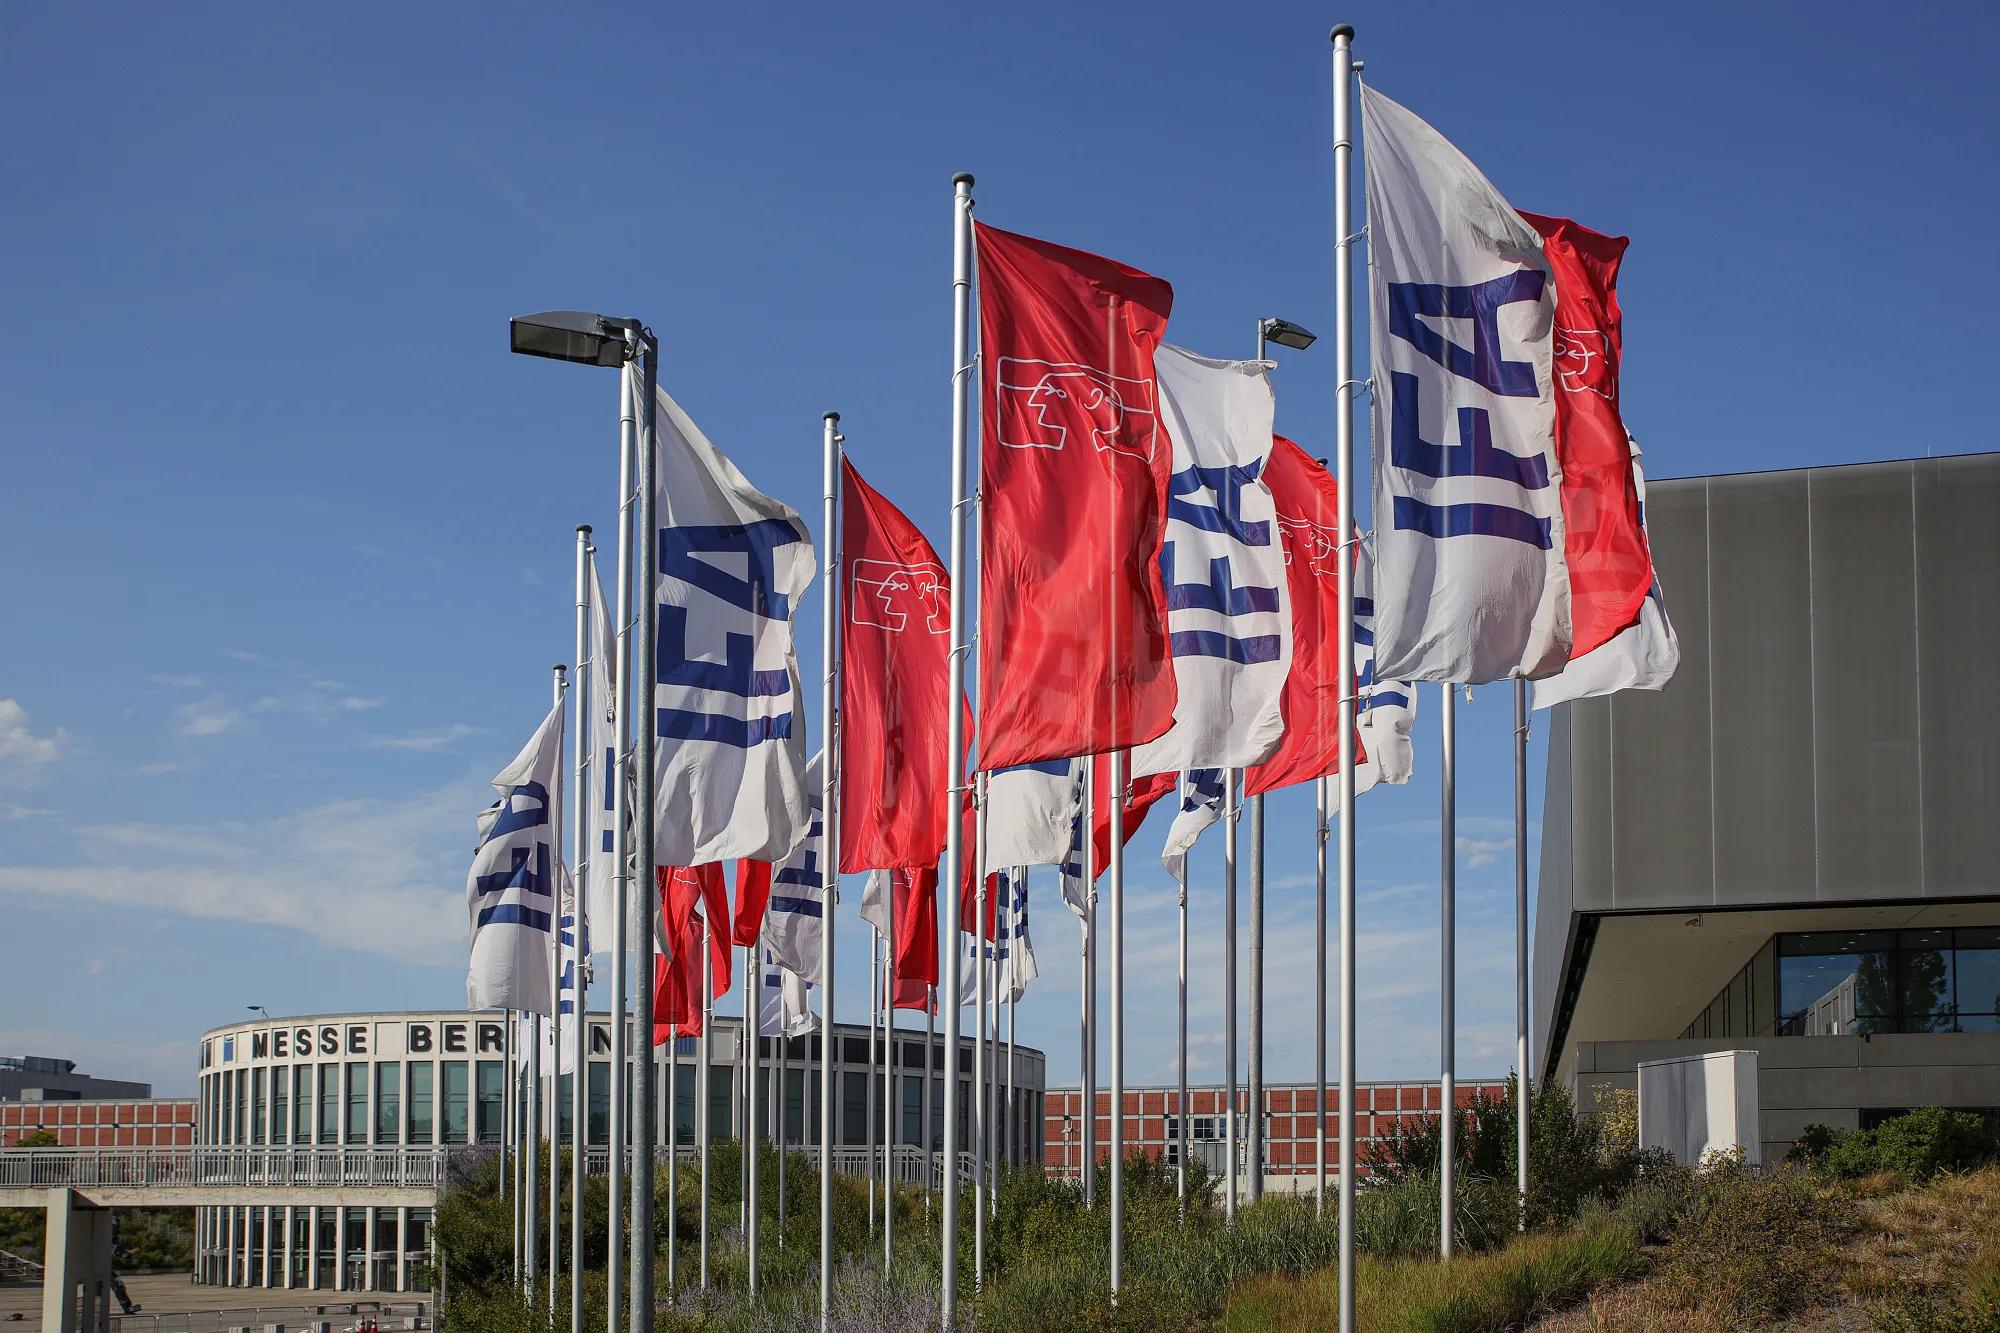 CALL FOR APPLICATIONS: IFA Berlin, 1 - 5 September 2023